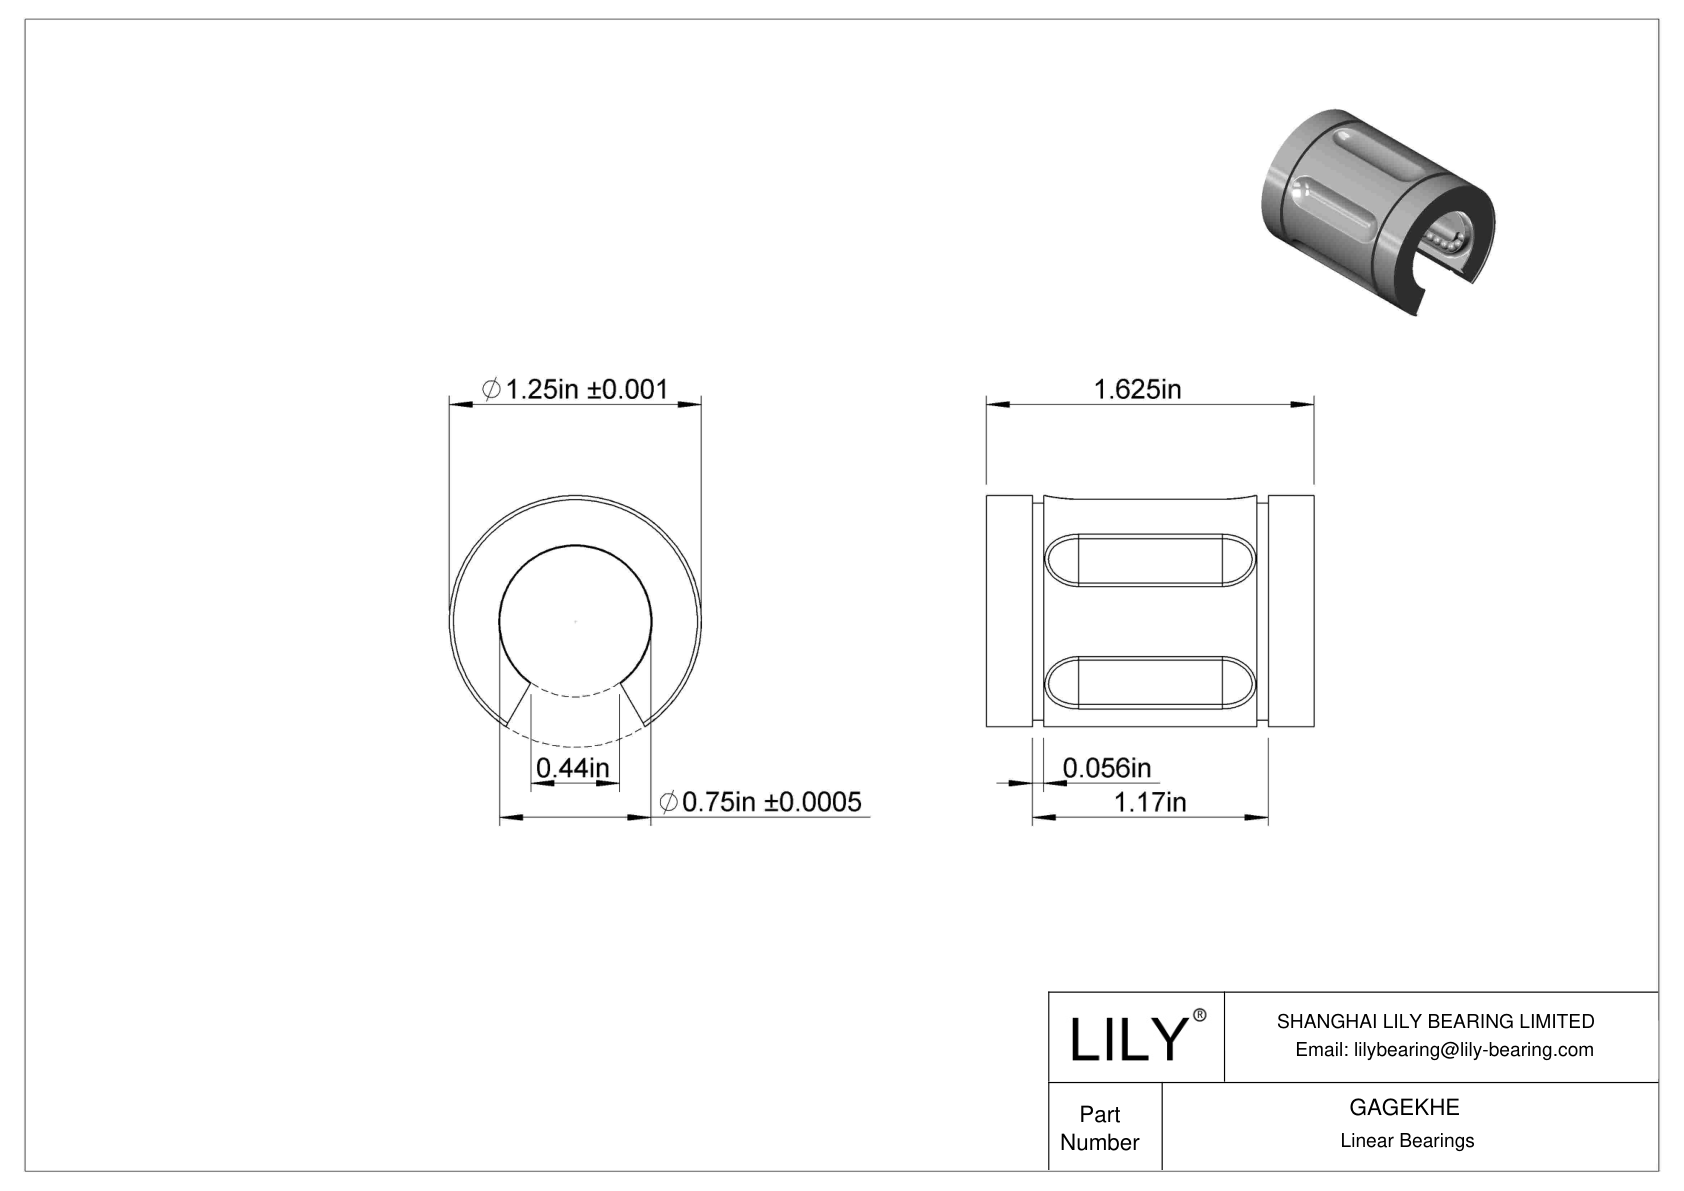 GAGEKHE High-Temperature Linear Ball Bearings for Support Rail Shafts cad drawing